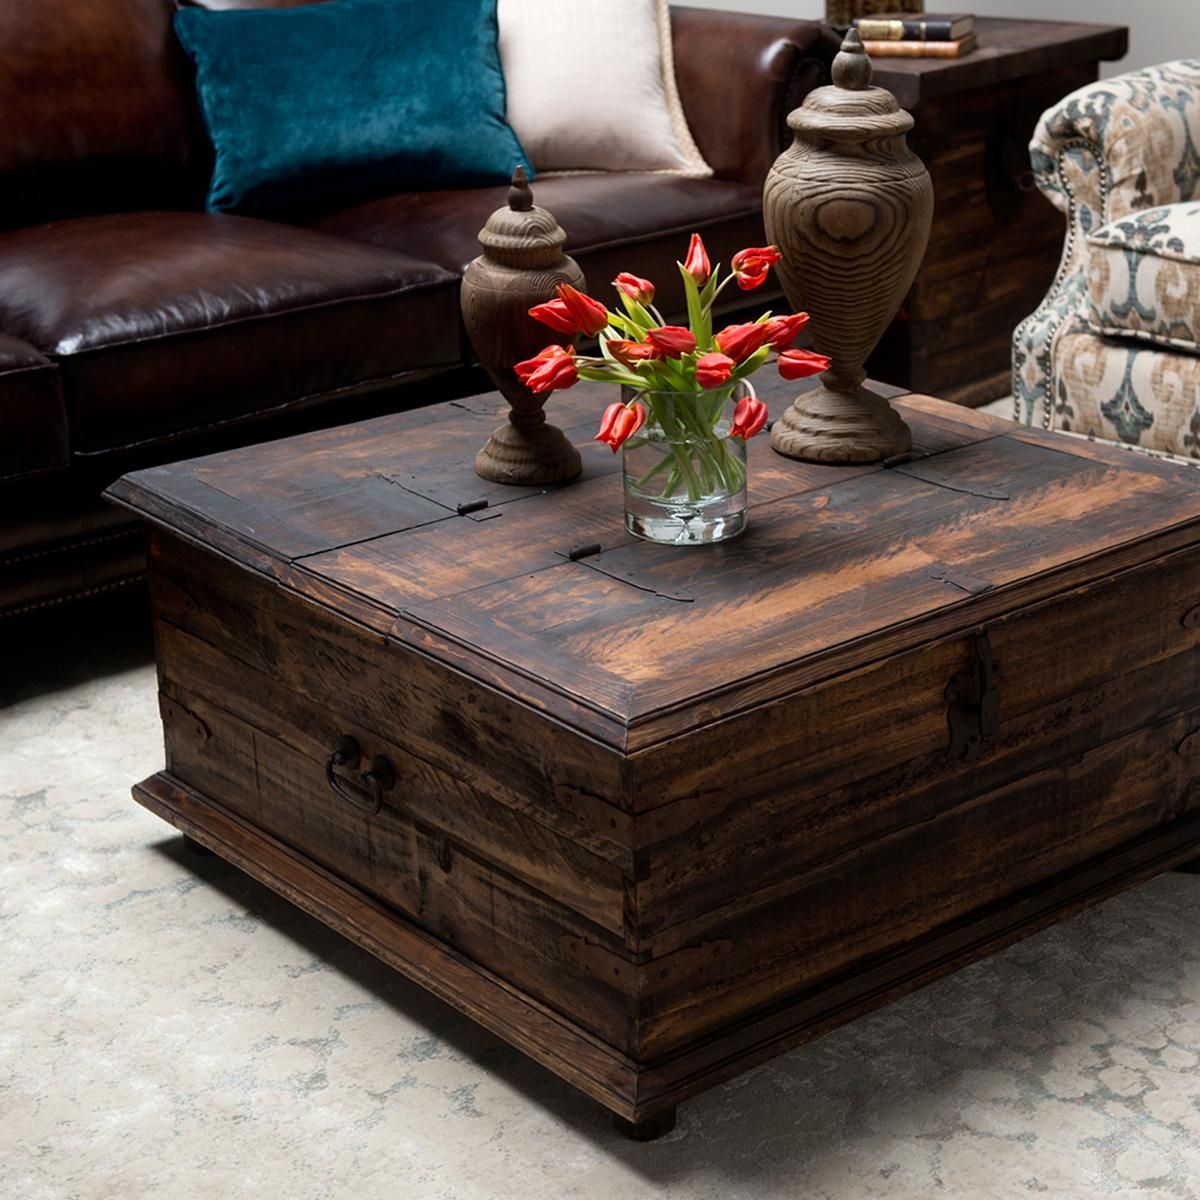 Rustic Trunk Coffee Table For Your Living Room – Homes Furniture Ideas Regarding Rustic Coffee Tables (Gallery 8 of 20)